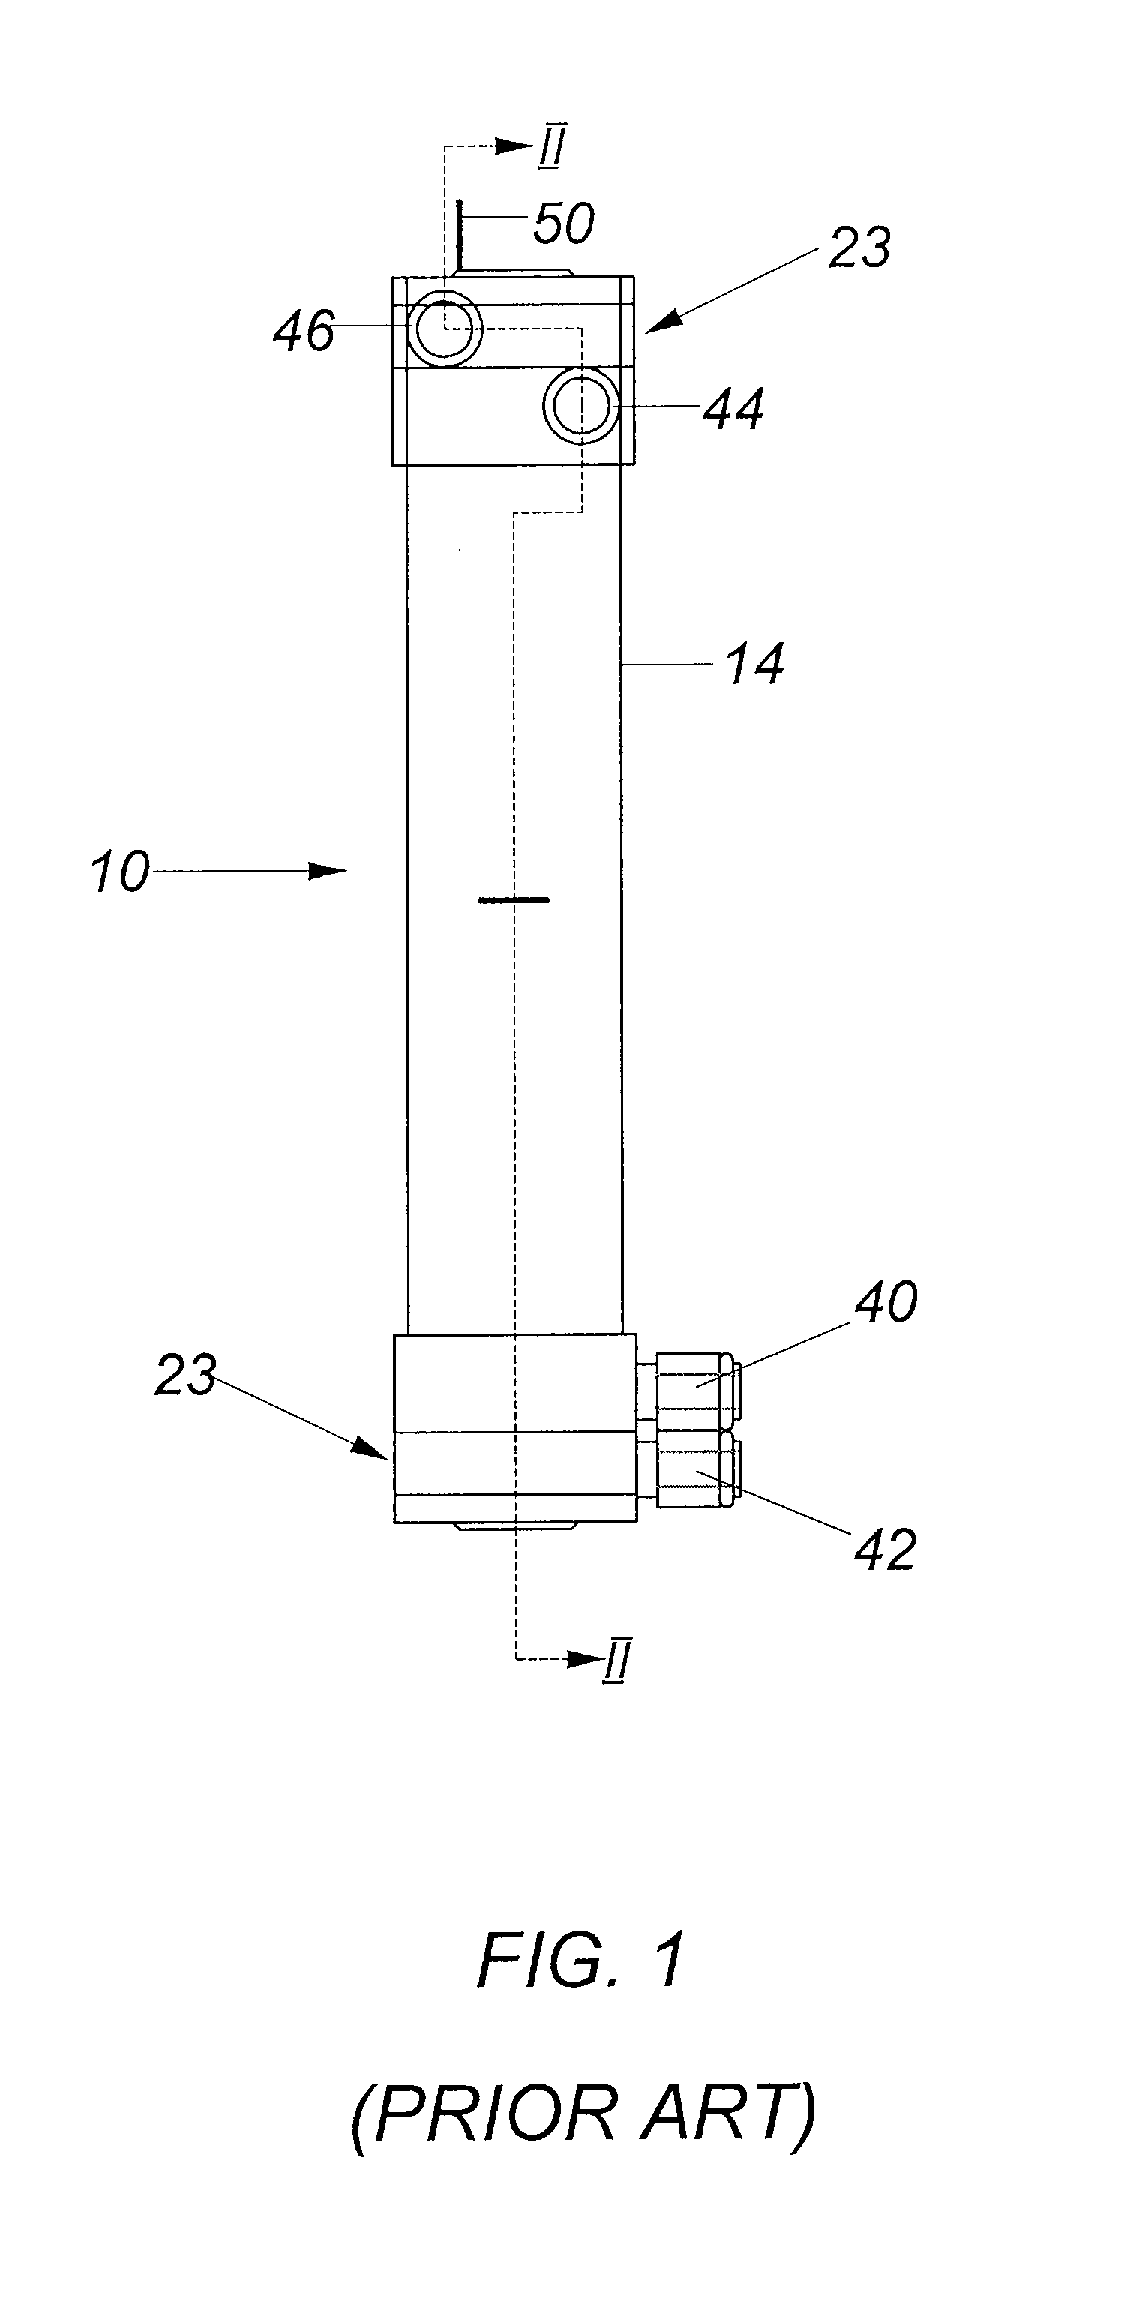 Dual diaphragm electrolysis cell assembly and method for generating a cleaning solution without any salt residues and simultaneously generating a sanitizing solution having a predetermined level of available free chlorine and pH